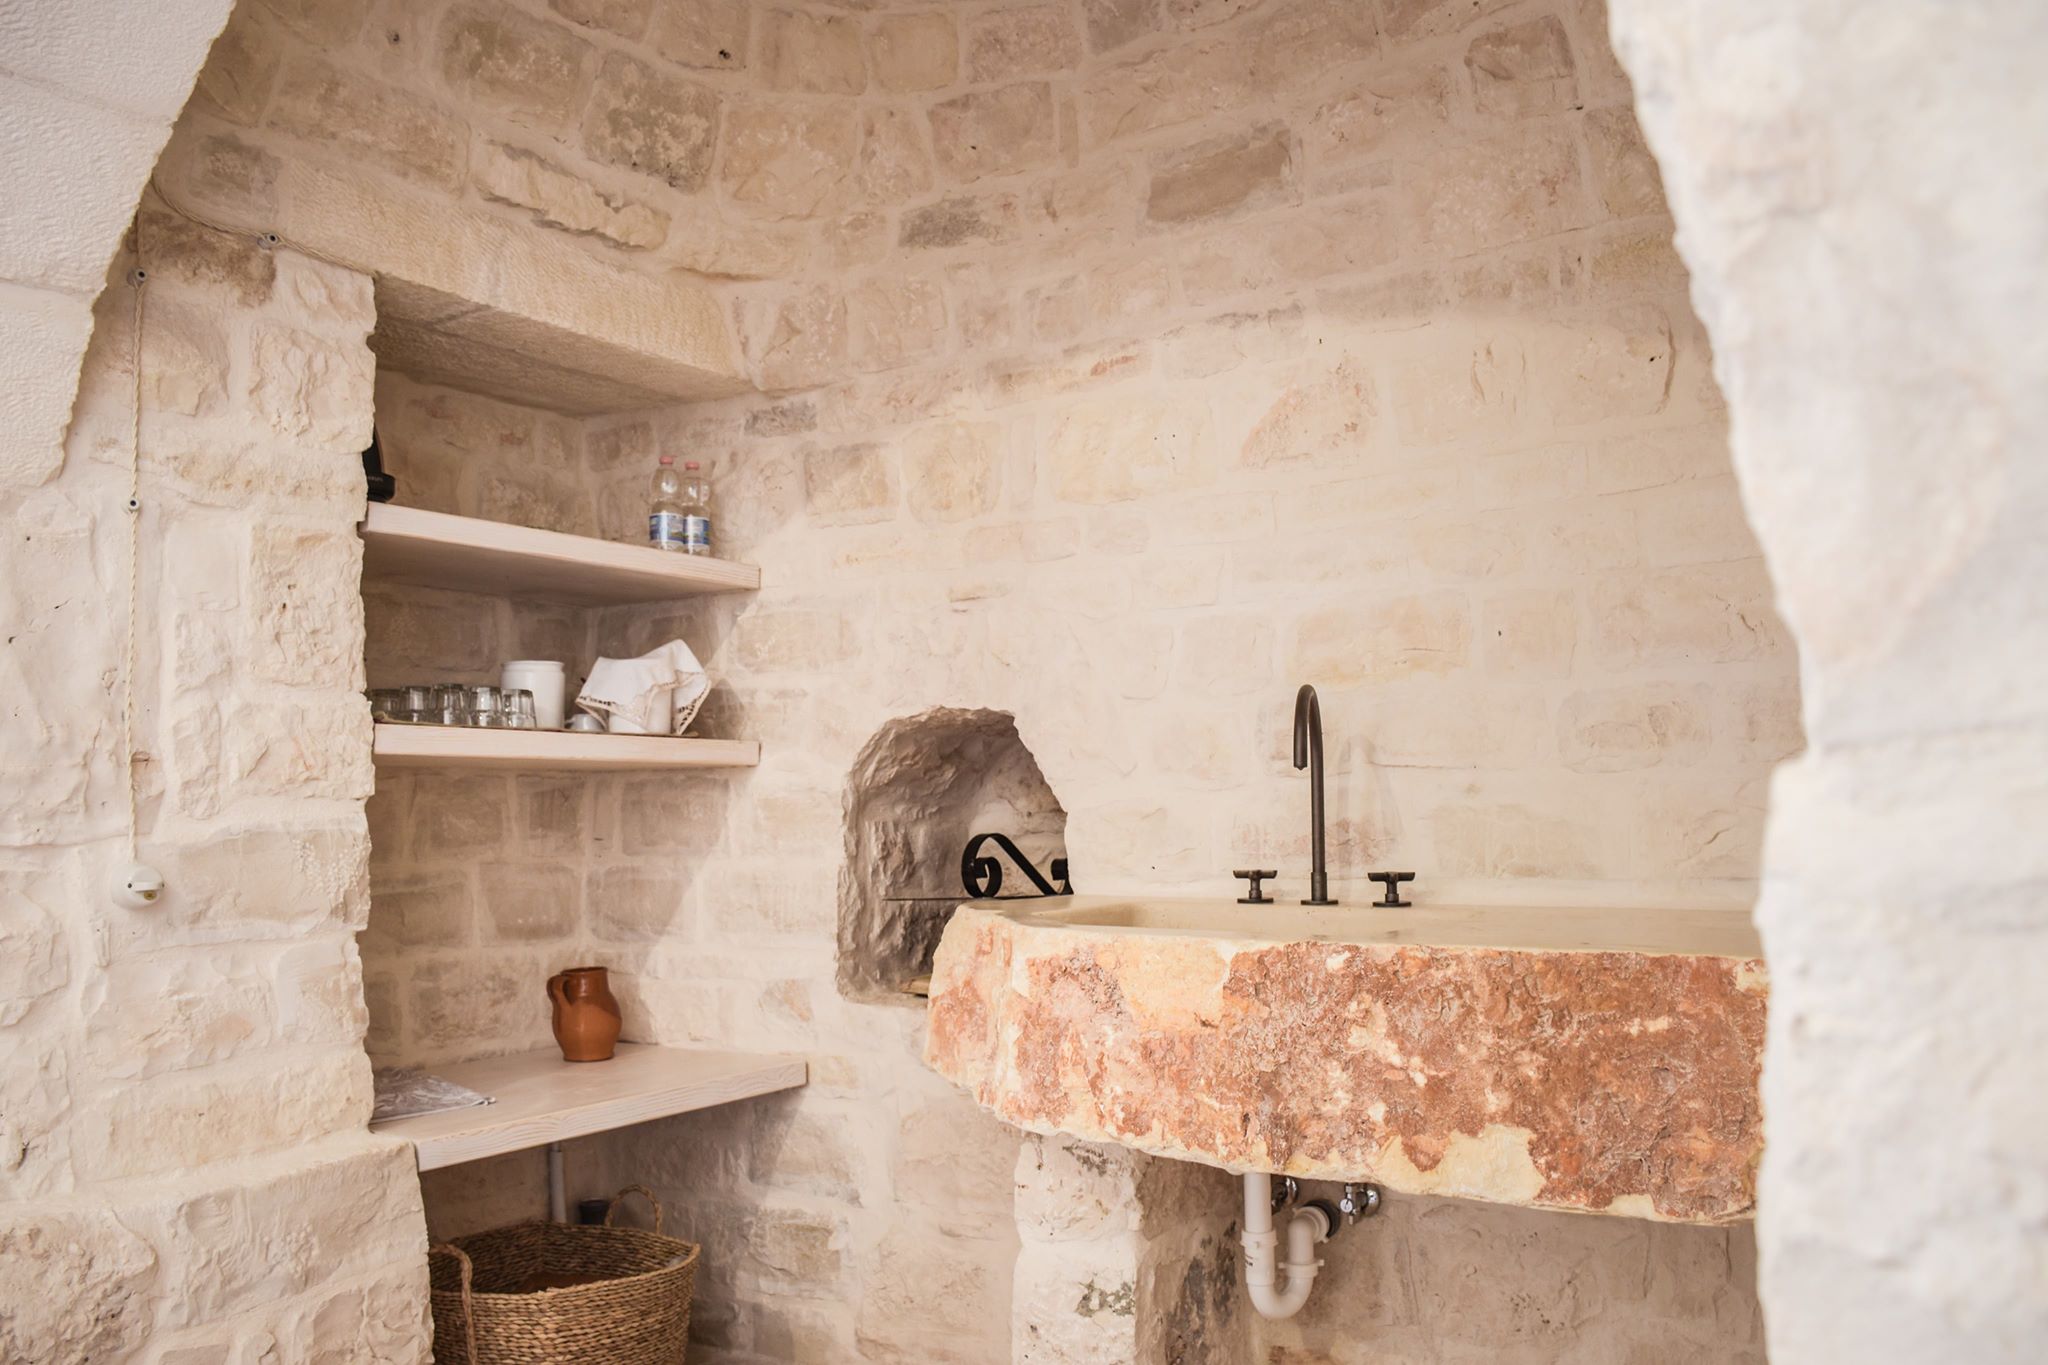 HOW TO FURNISH A TRULLO? OUR ADVICES